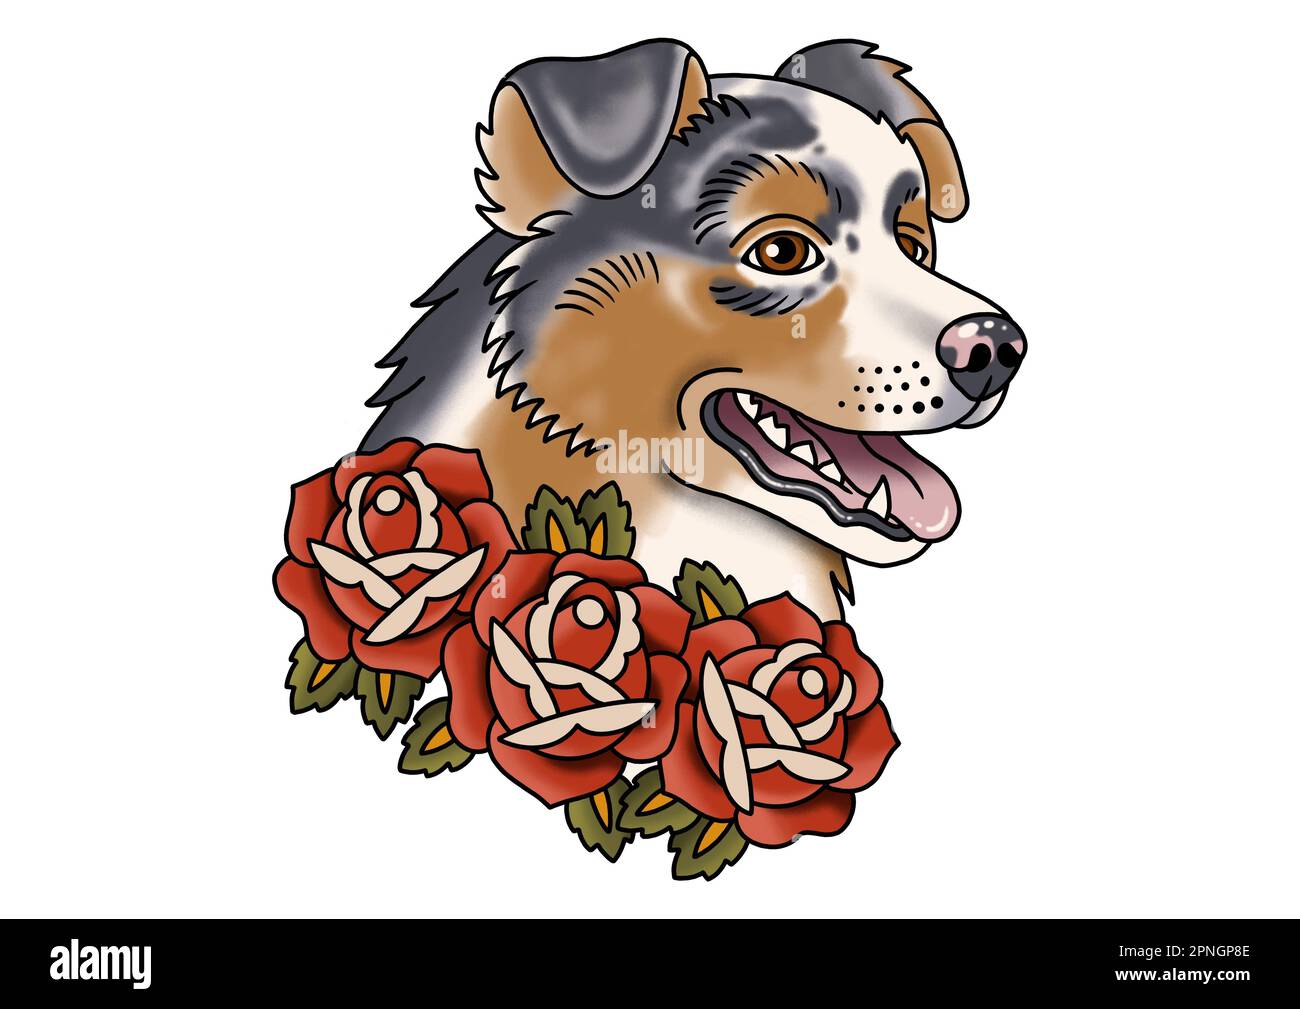 Dog Portrait australian shepherd with roses  full color Drawing inspired by the tattoo art style Stock Photo